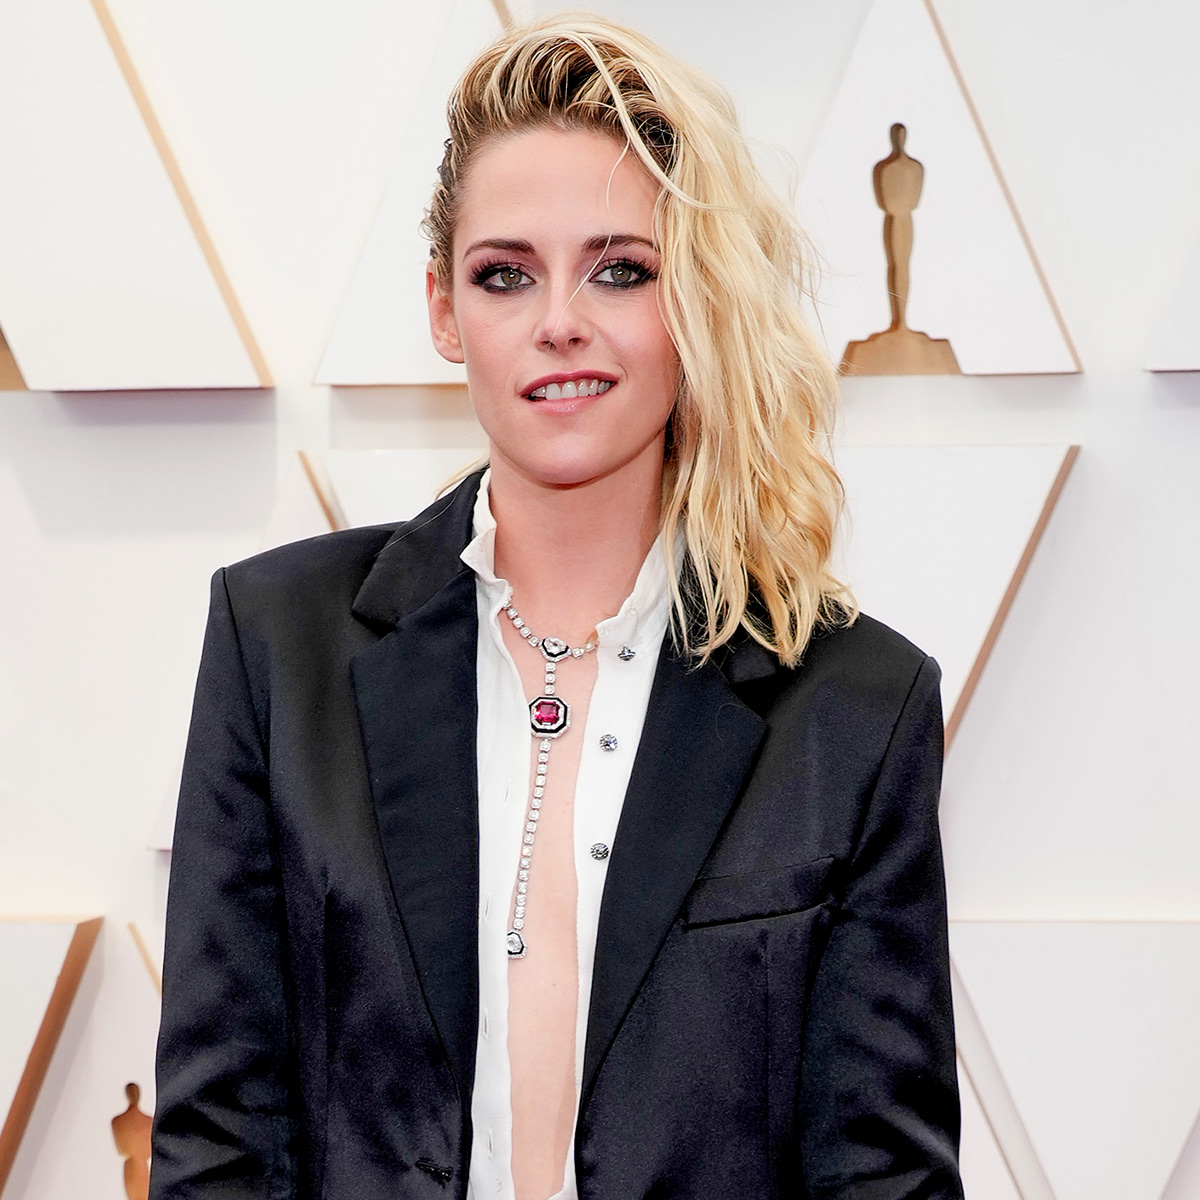 Kristen Stewart Style File: Over 100 Of Her Best Fashion and Style Moments